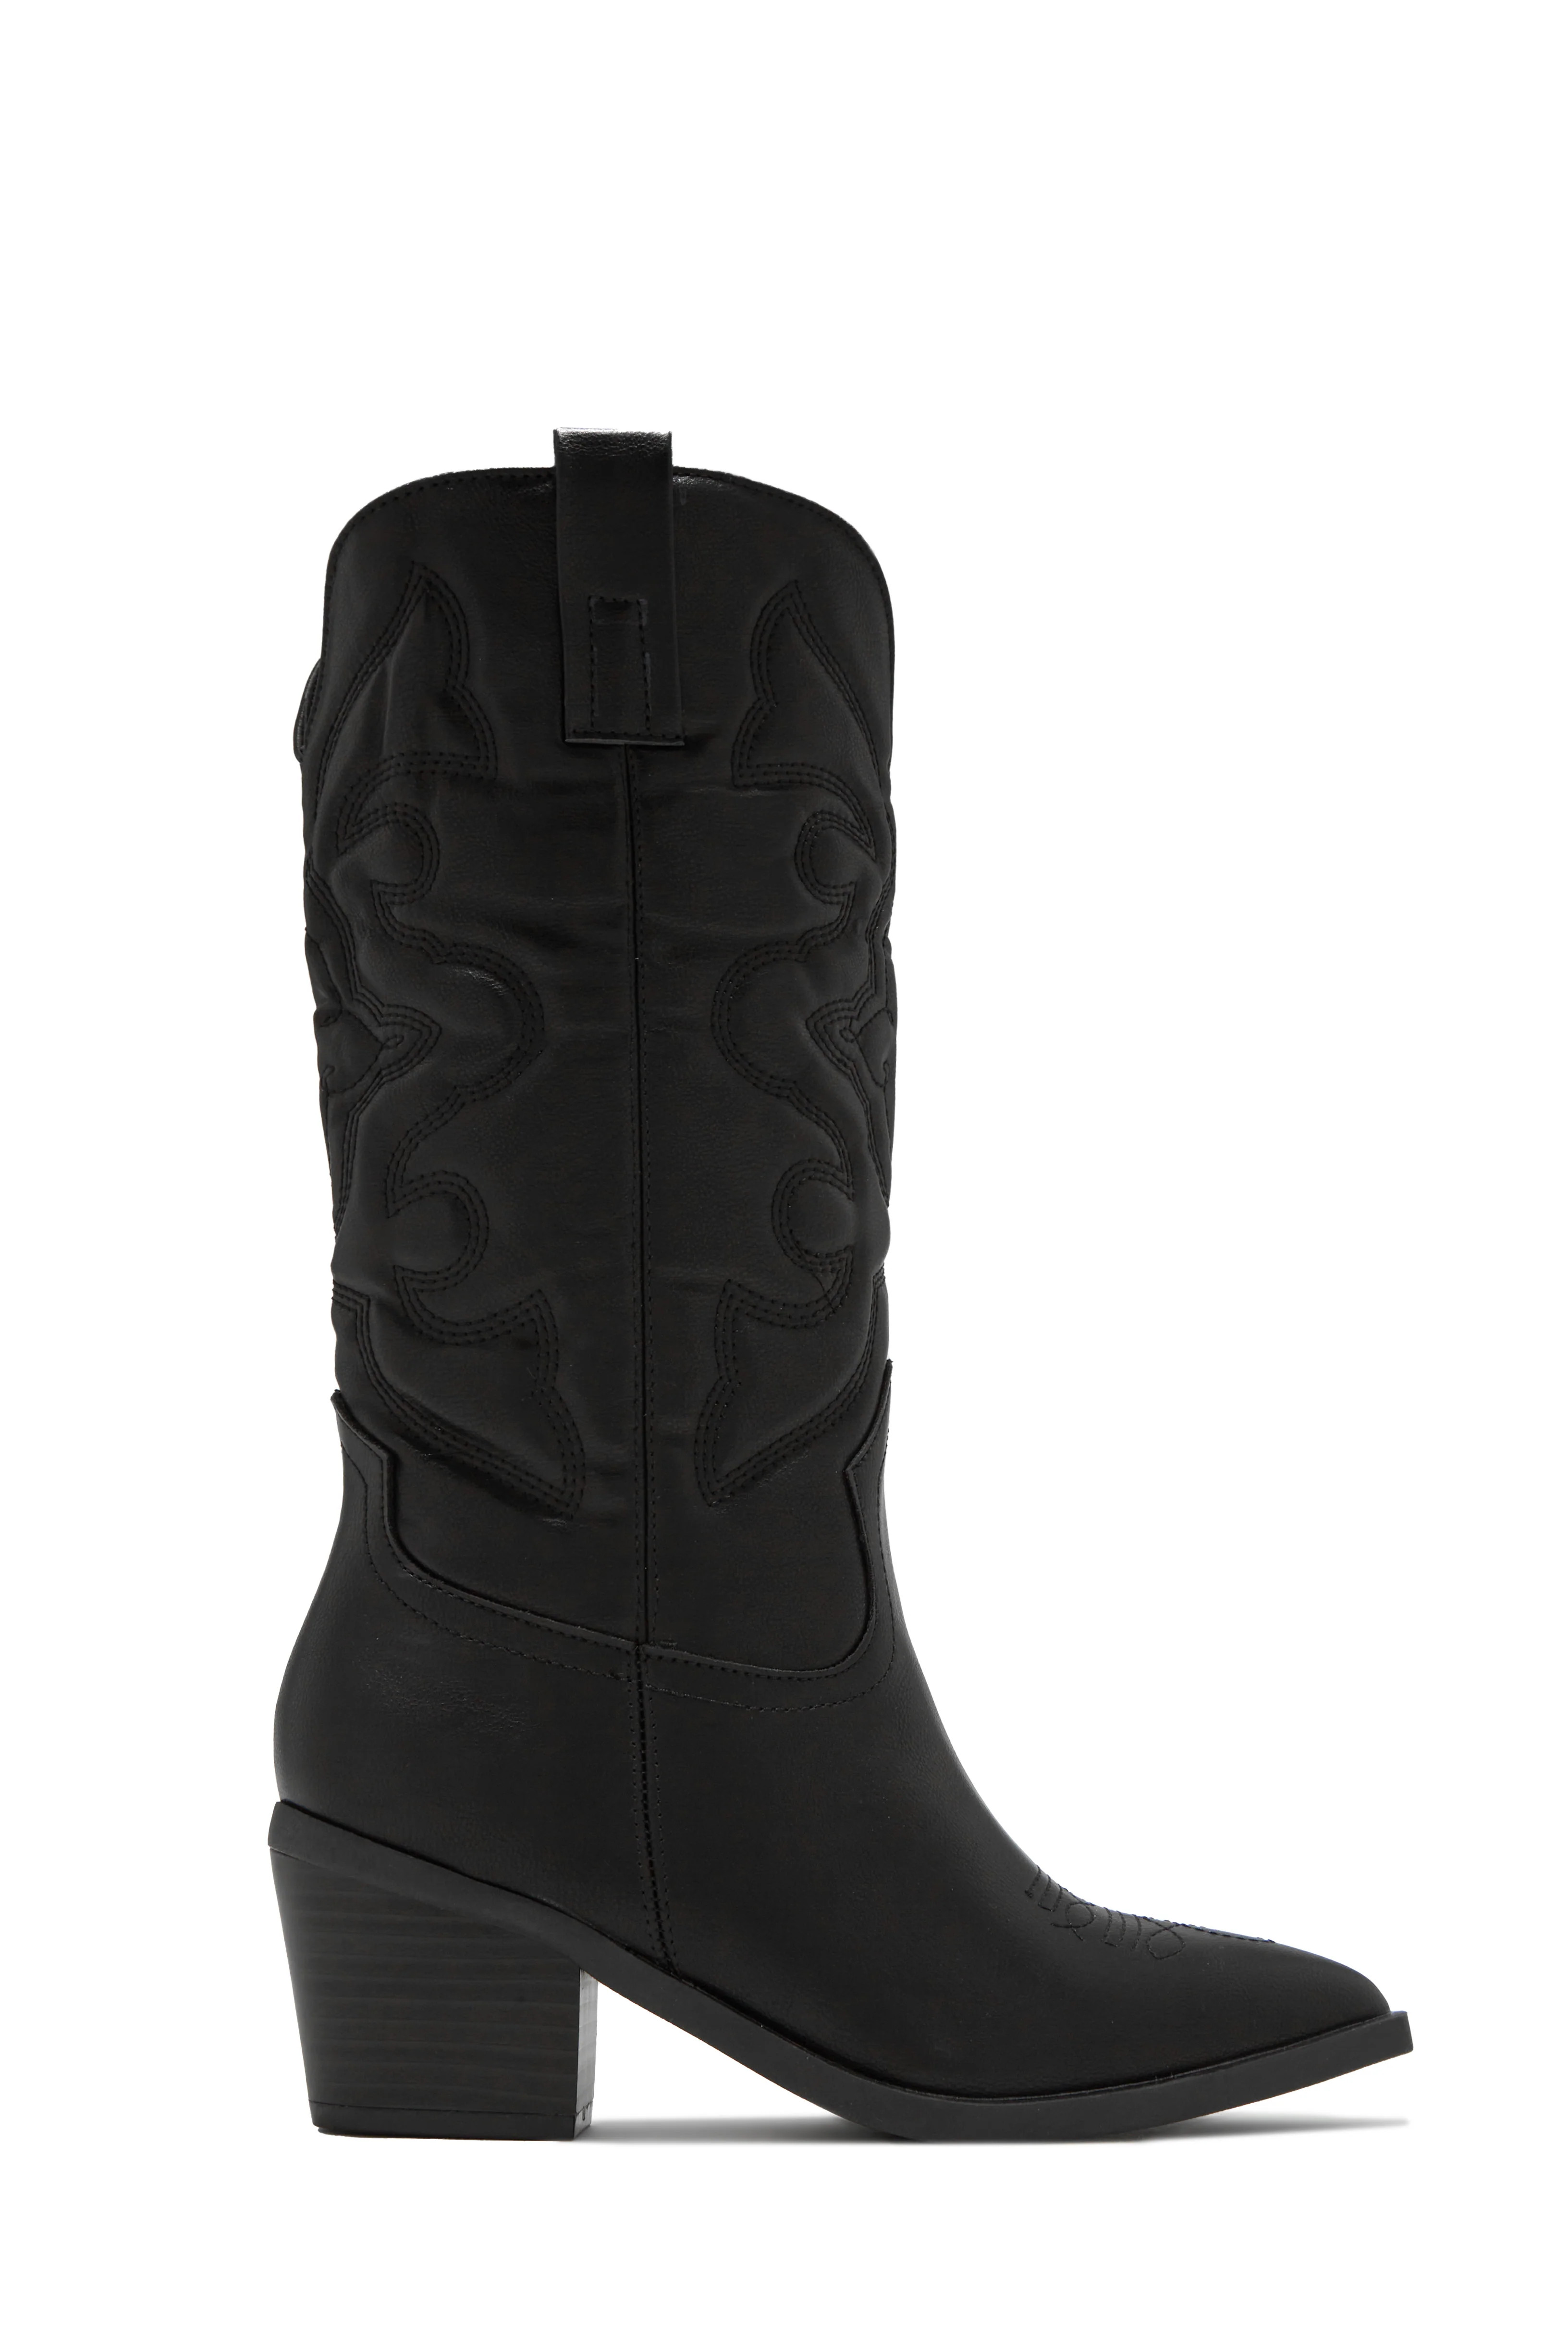 Miss Lola | Dylan Black Western Cowgirl Boots | MISS LOLA